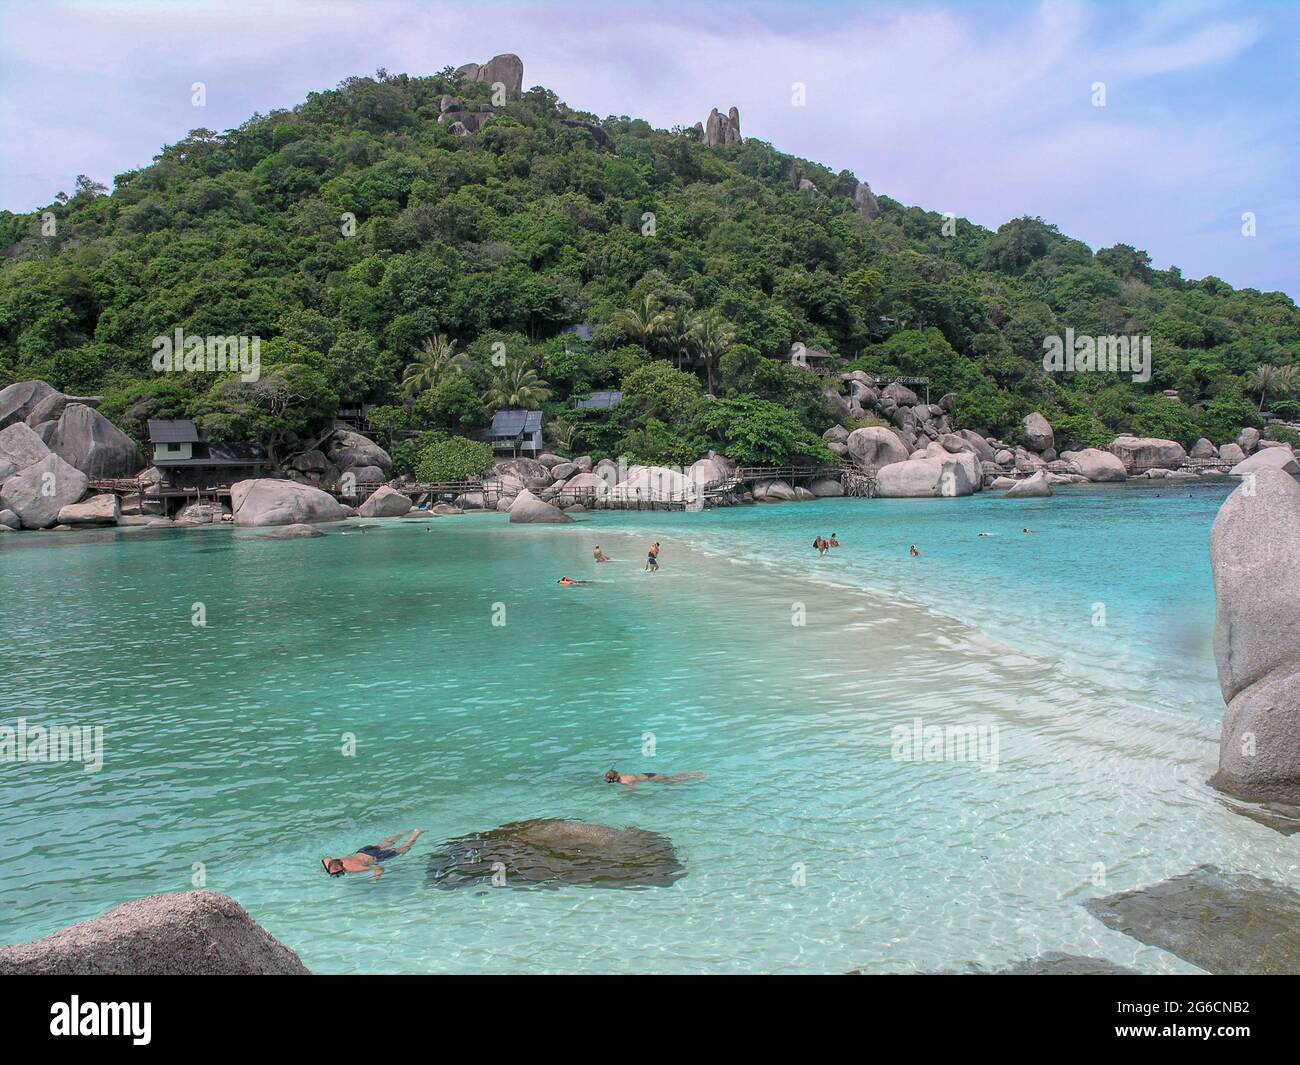 July 5, 2021-Koh Tao, Thailand-In this phoo taken is Nov 15, 2005. A View of Koh Tao beautiful scene. Stock Photo